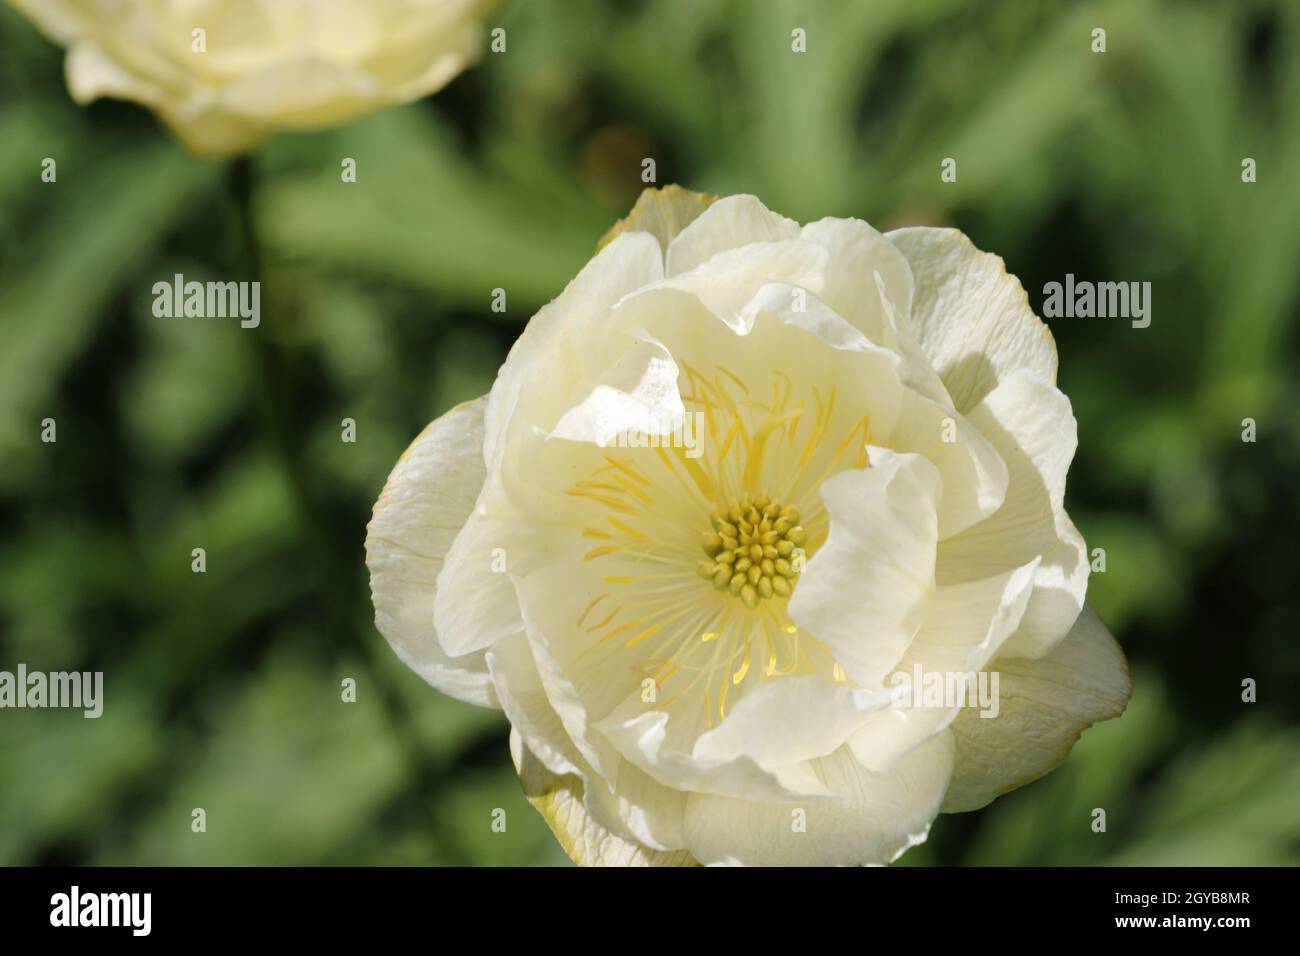 Pale yellow hybrid globeflower, Trollius x cultorum variety Alabaster, flower in close up with a background of blurred leaves and flowers. Stock Photo